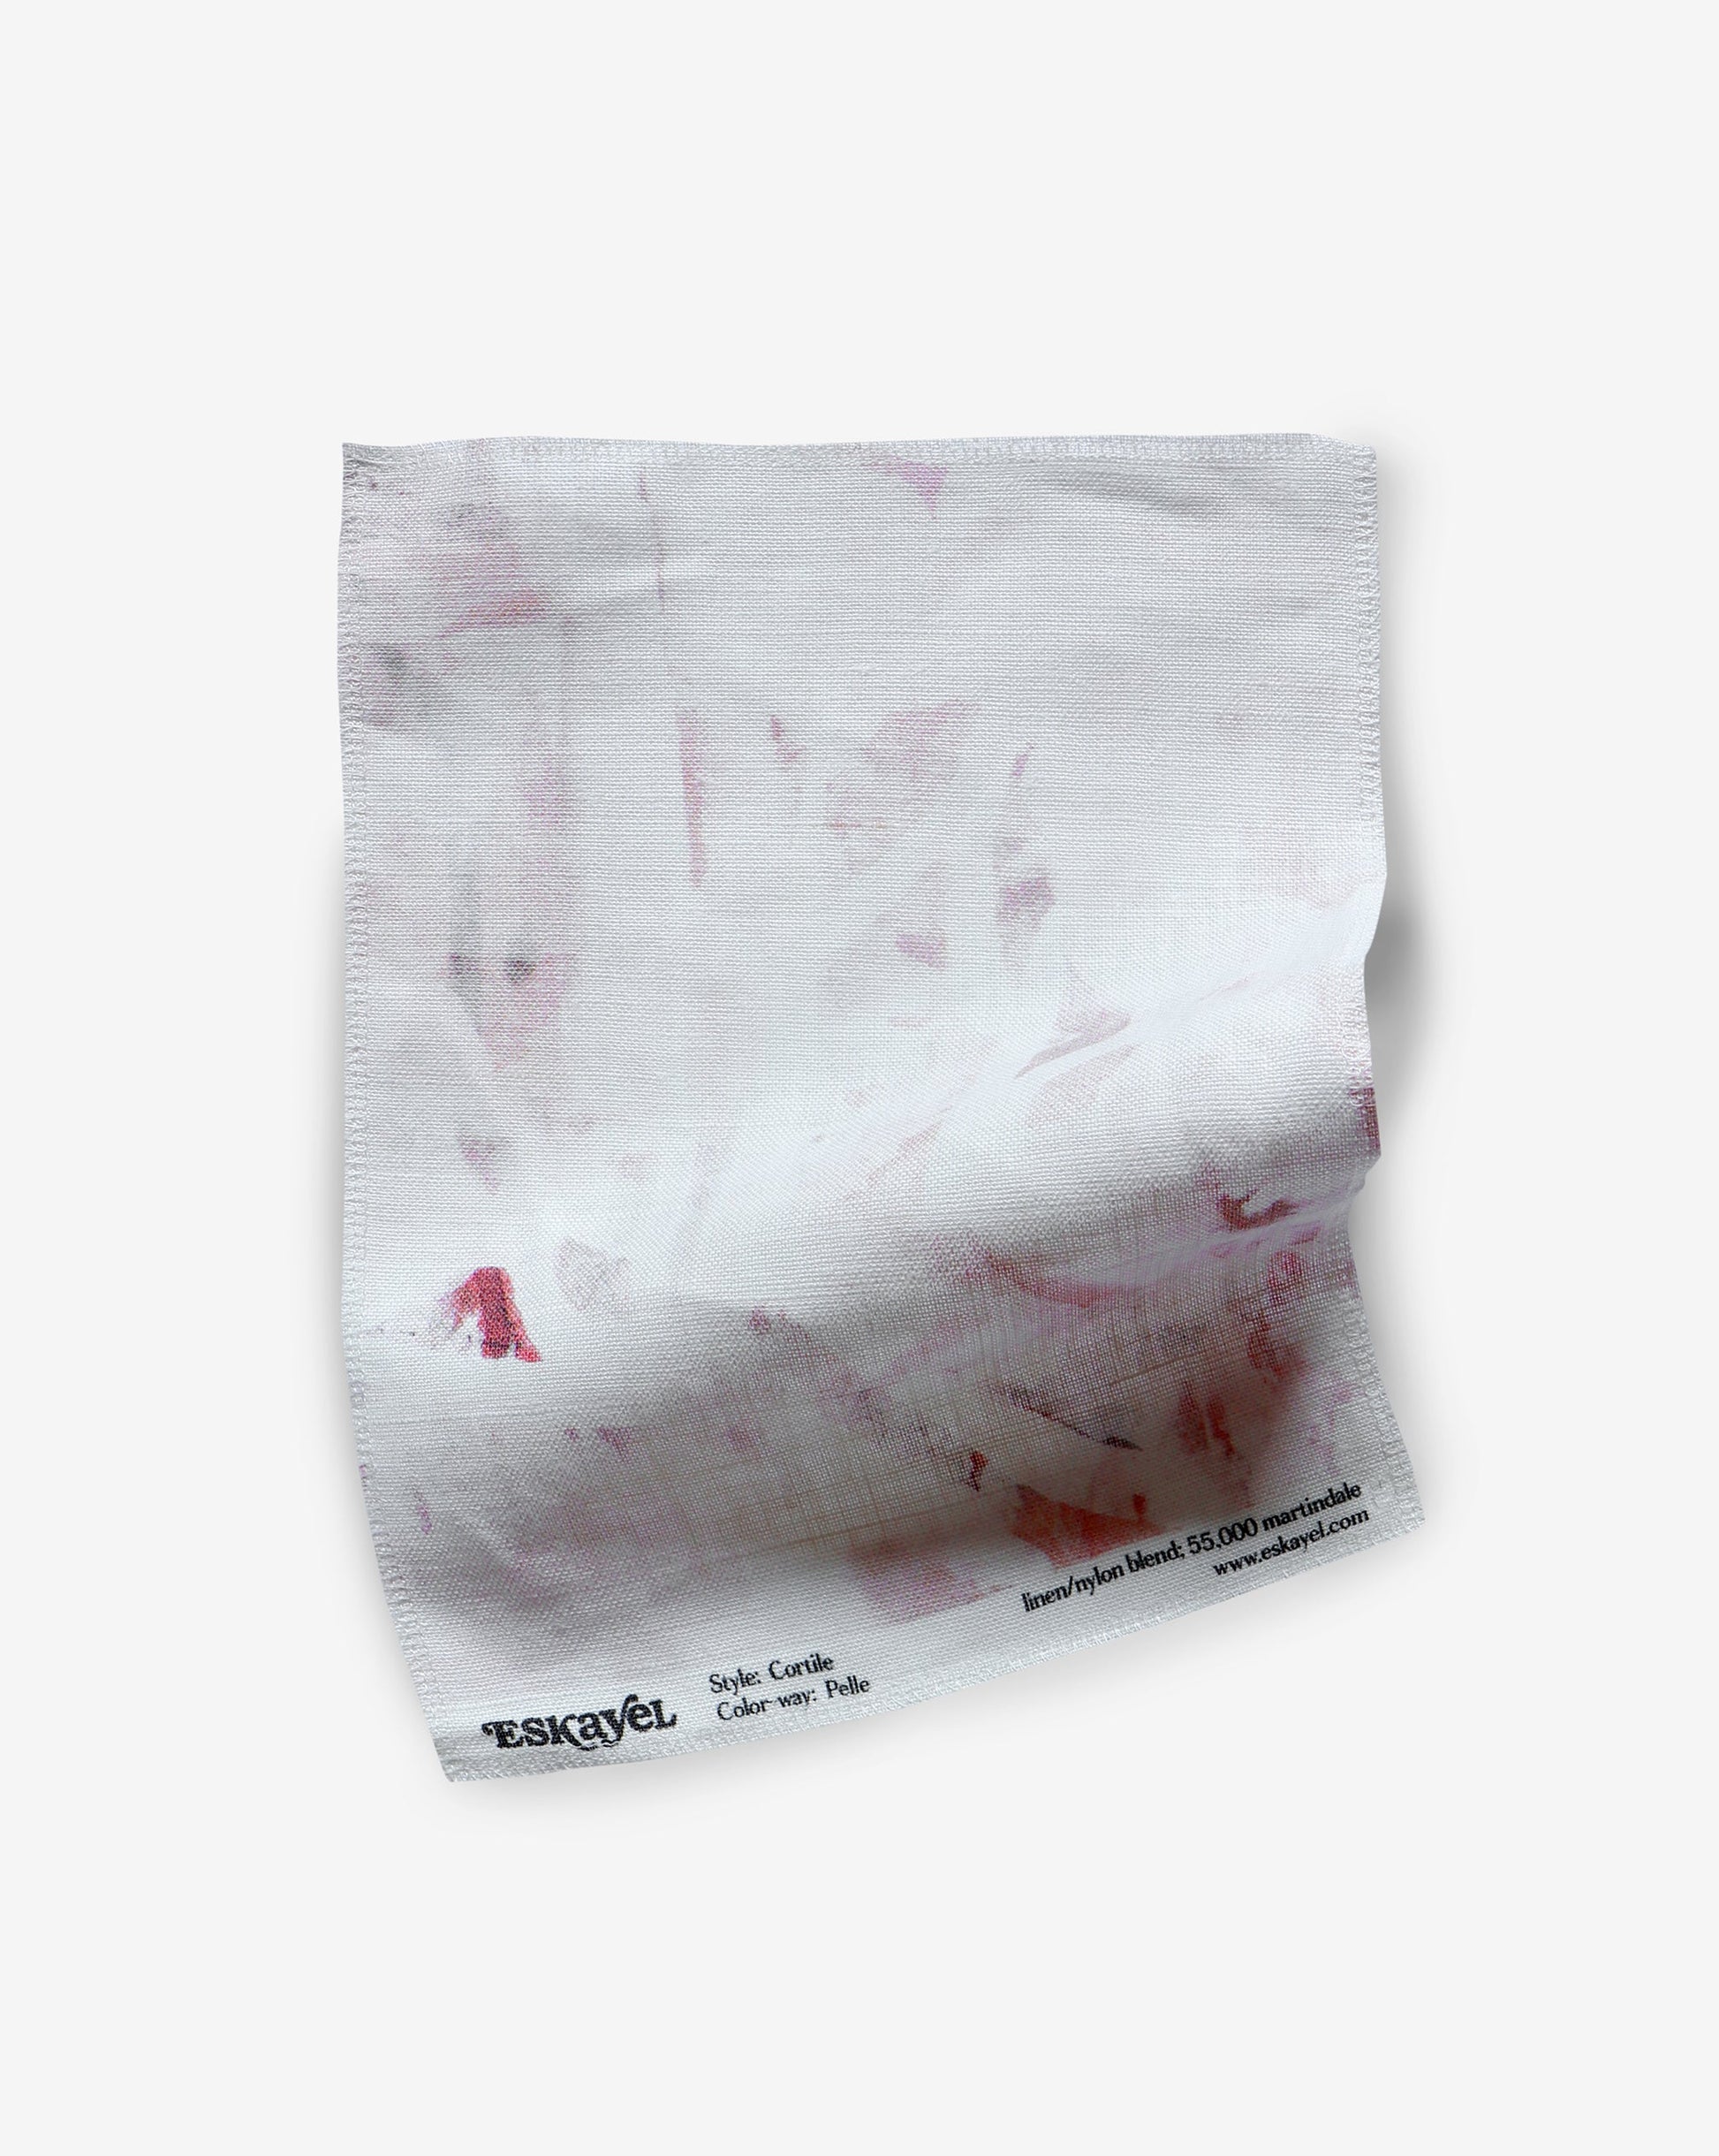 A Cortile Fabric Sample with blood on it